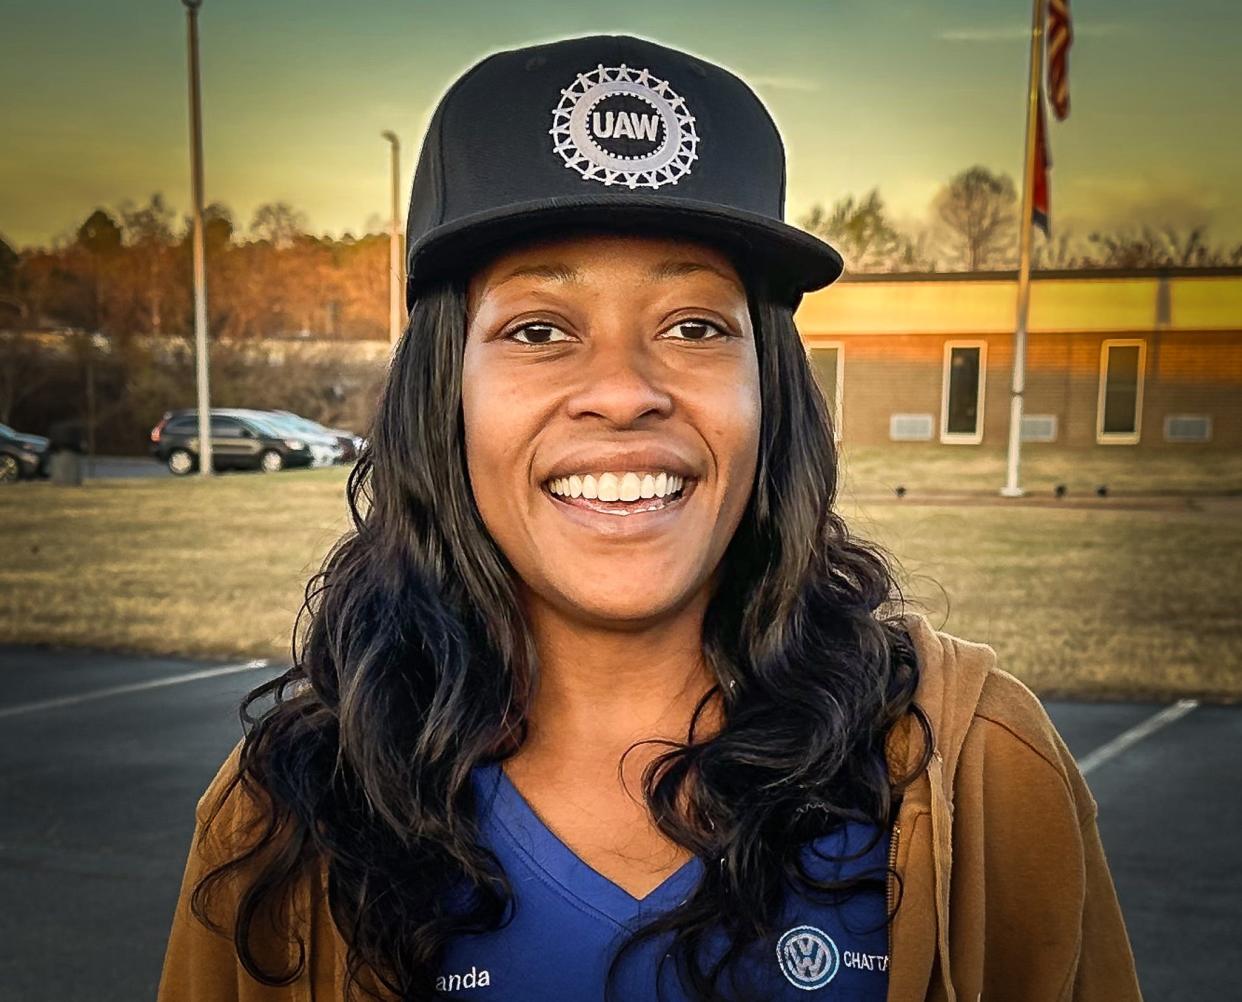 Yolanda Peoples works at the VW plant in Chattanooga and supports the union drive by the UAW.